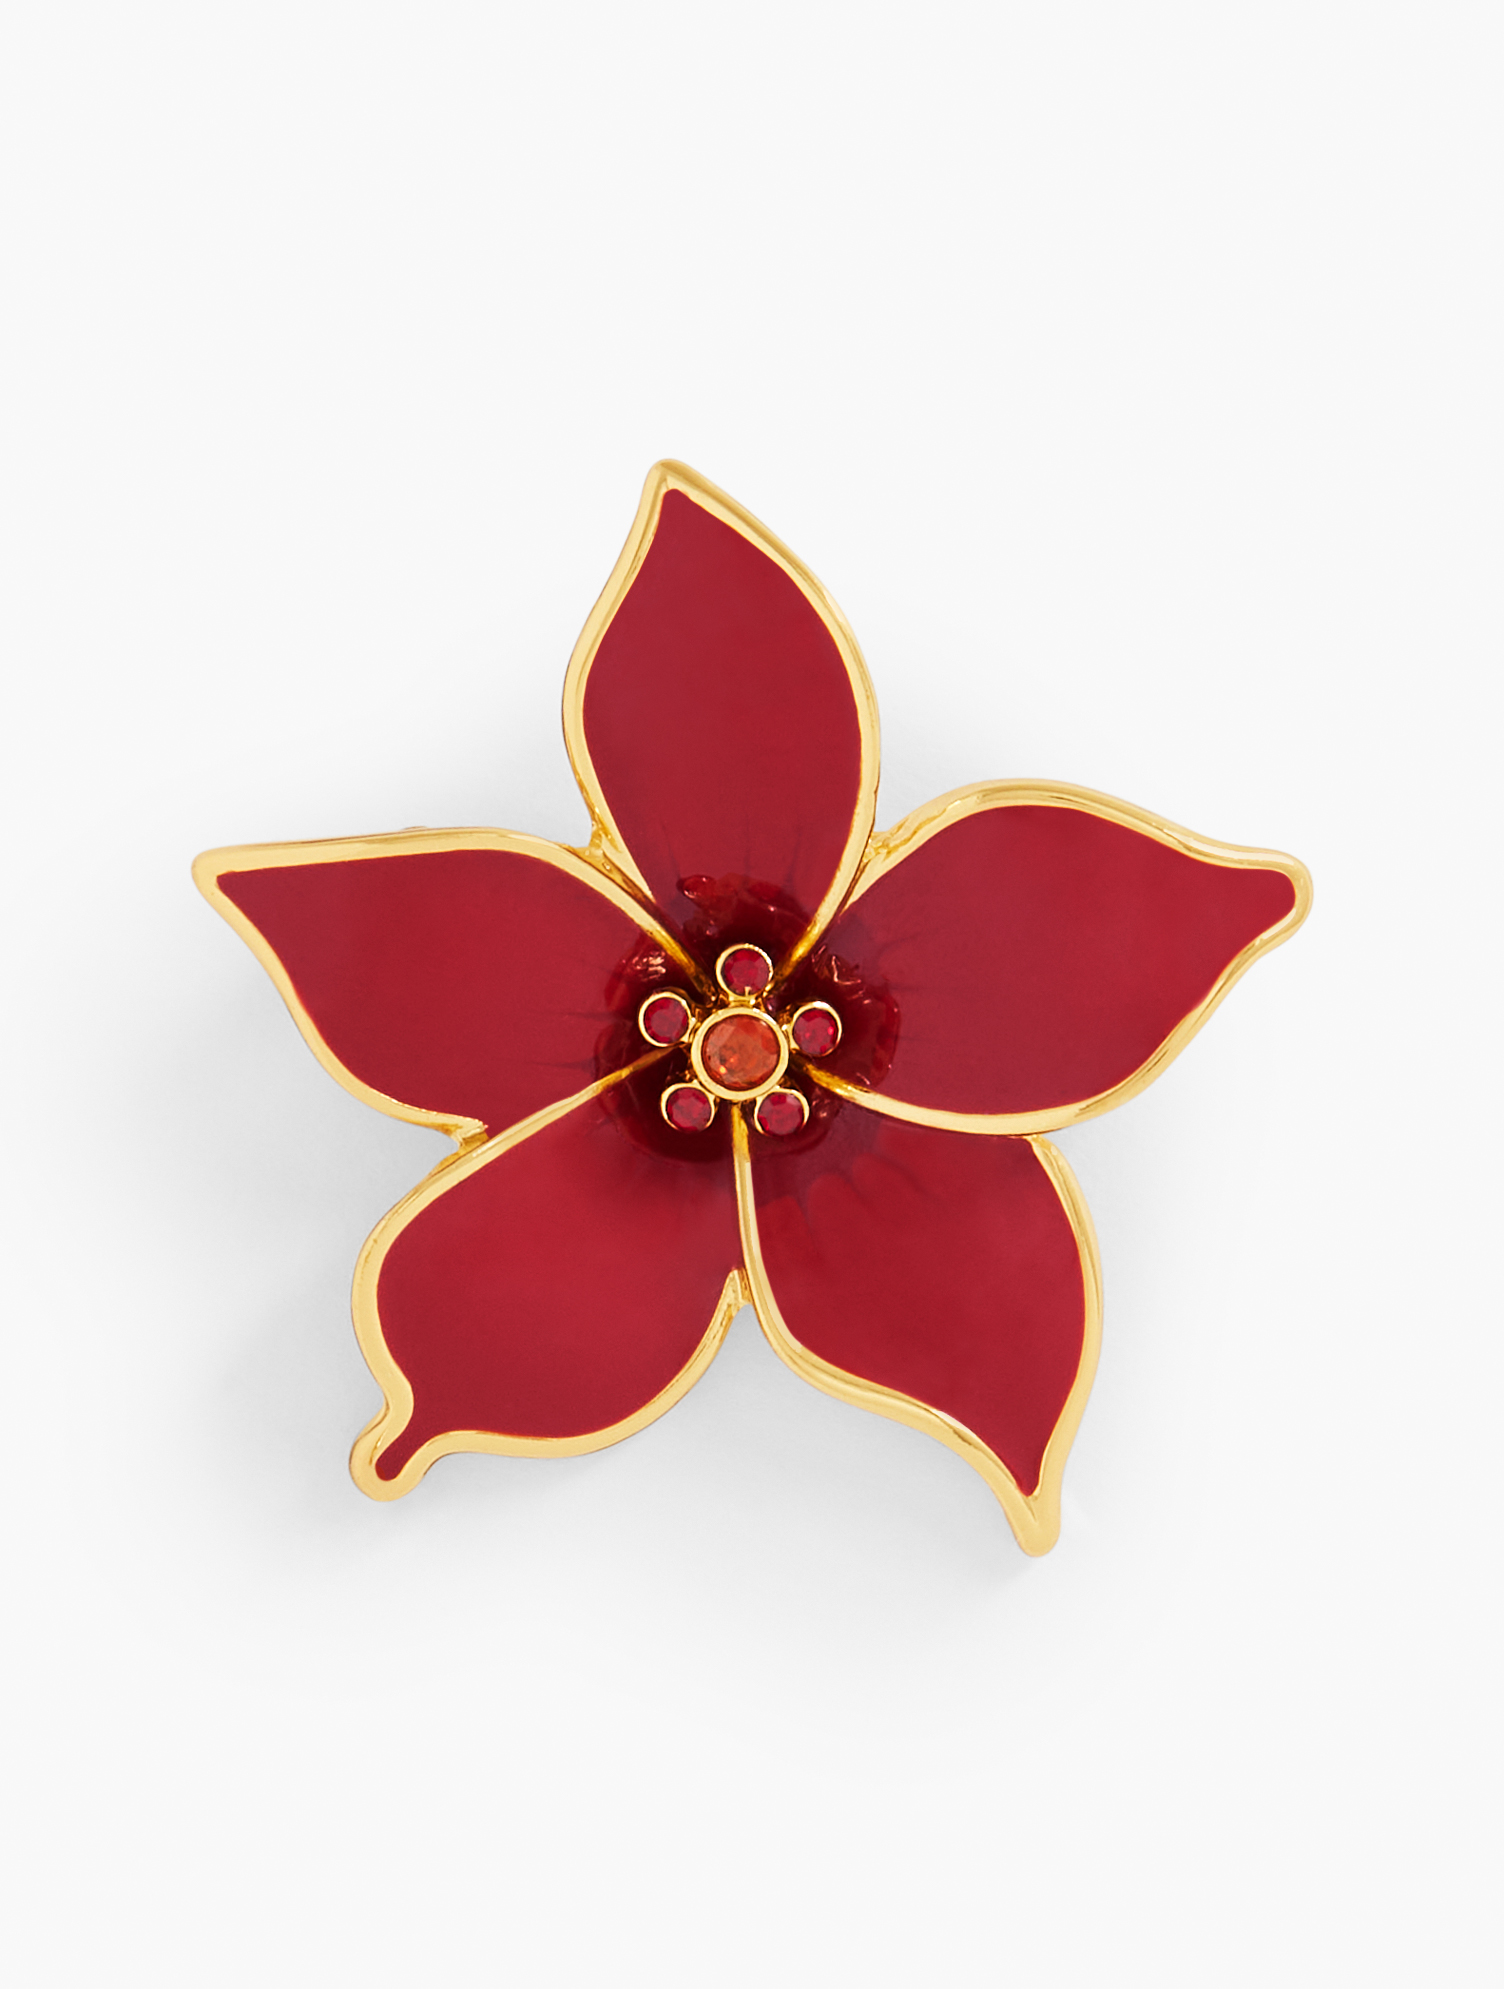 Talbots Pretty Poinsettia Brooch - Red/gold - 001  In Red,gold